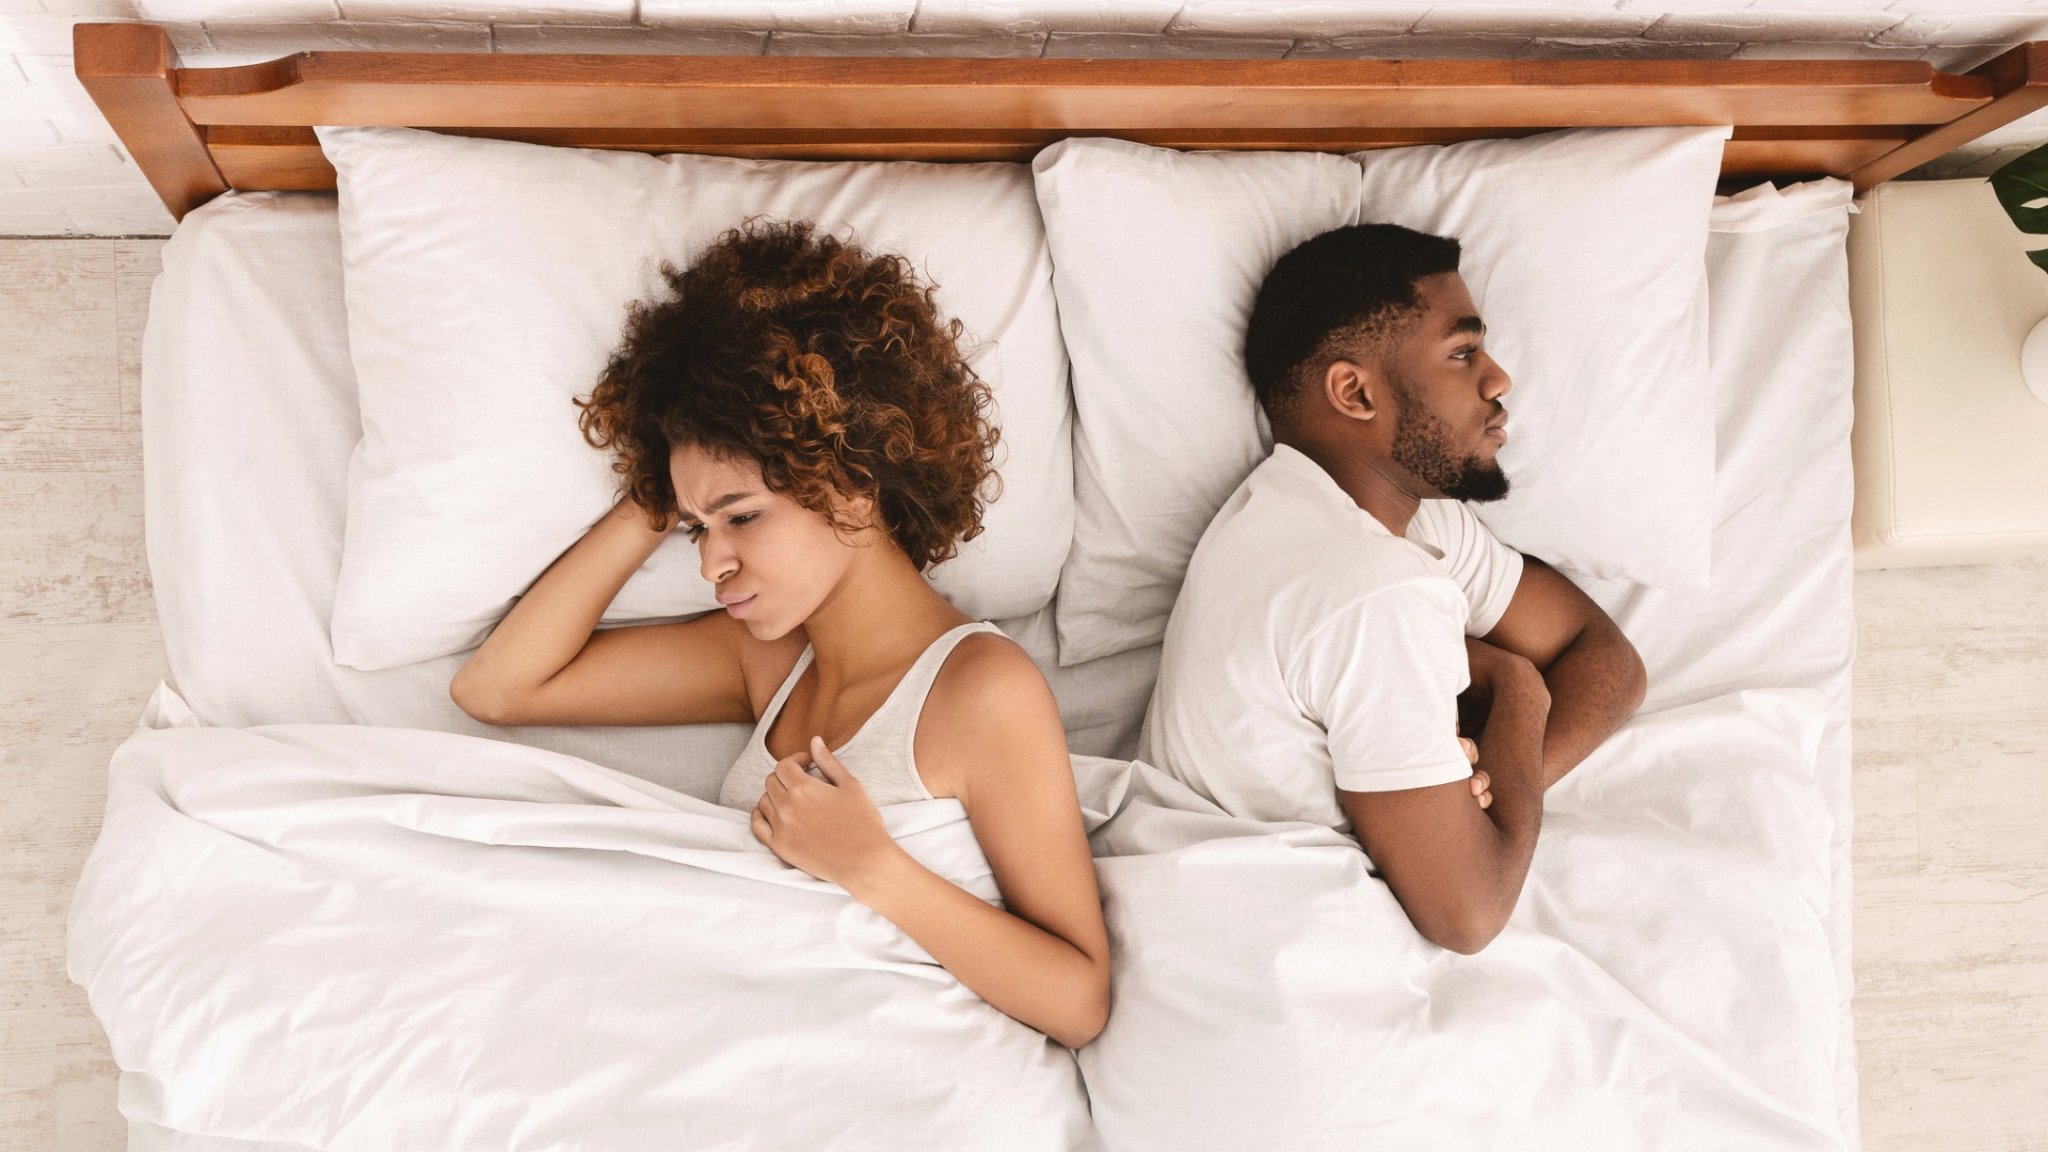 Ask Dana: My Partner Never Says What He Wants in the Bedroom. What Can I Do?